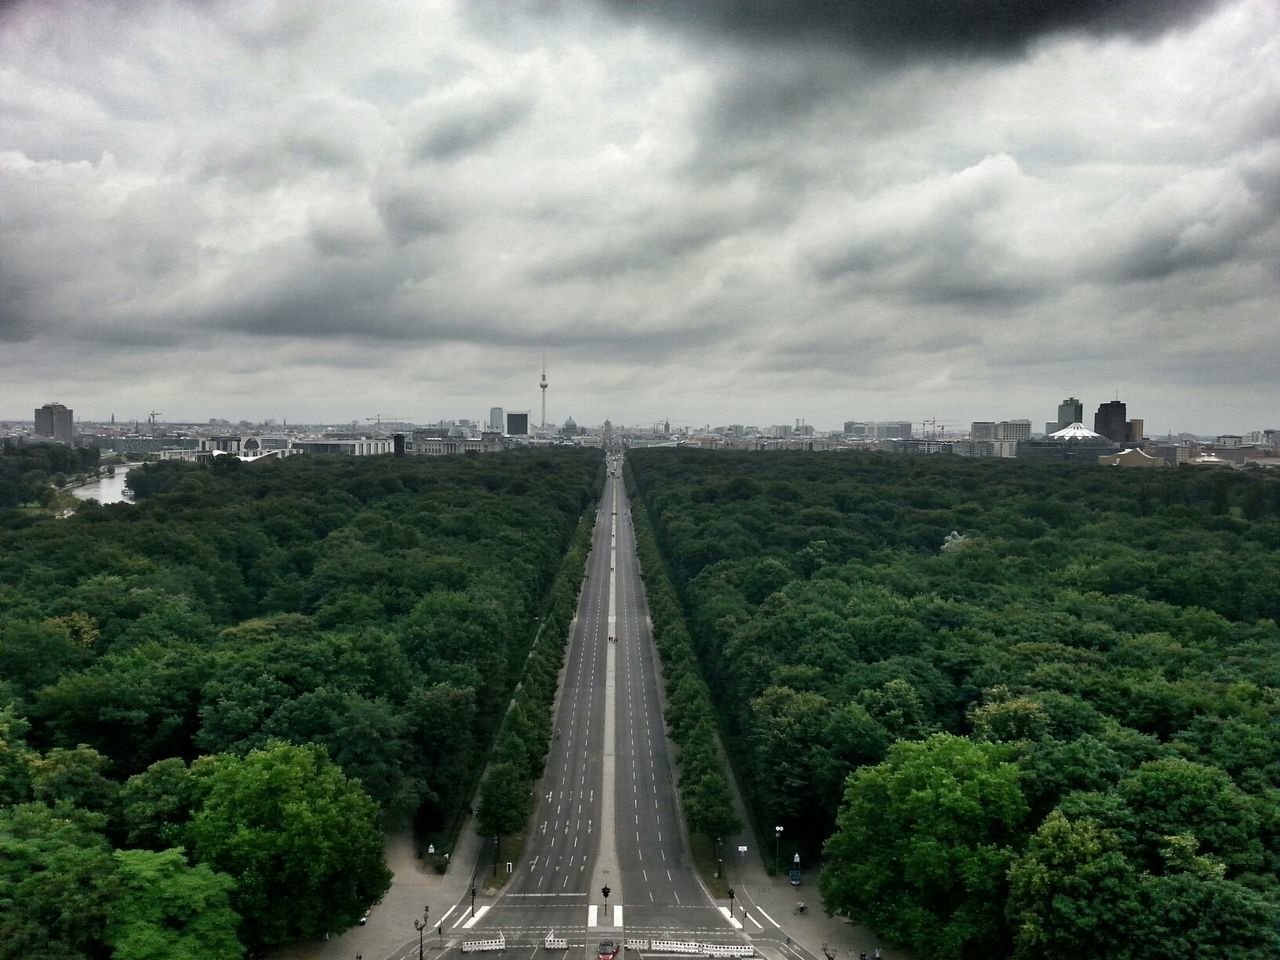 Aerial view of long highway between dense forests against cloudy sky